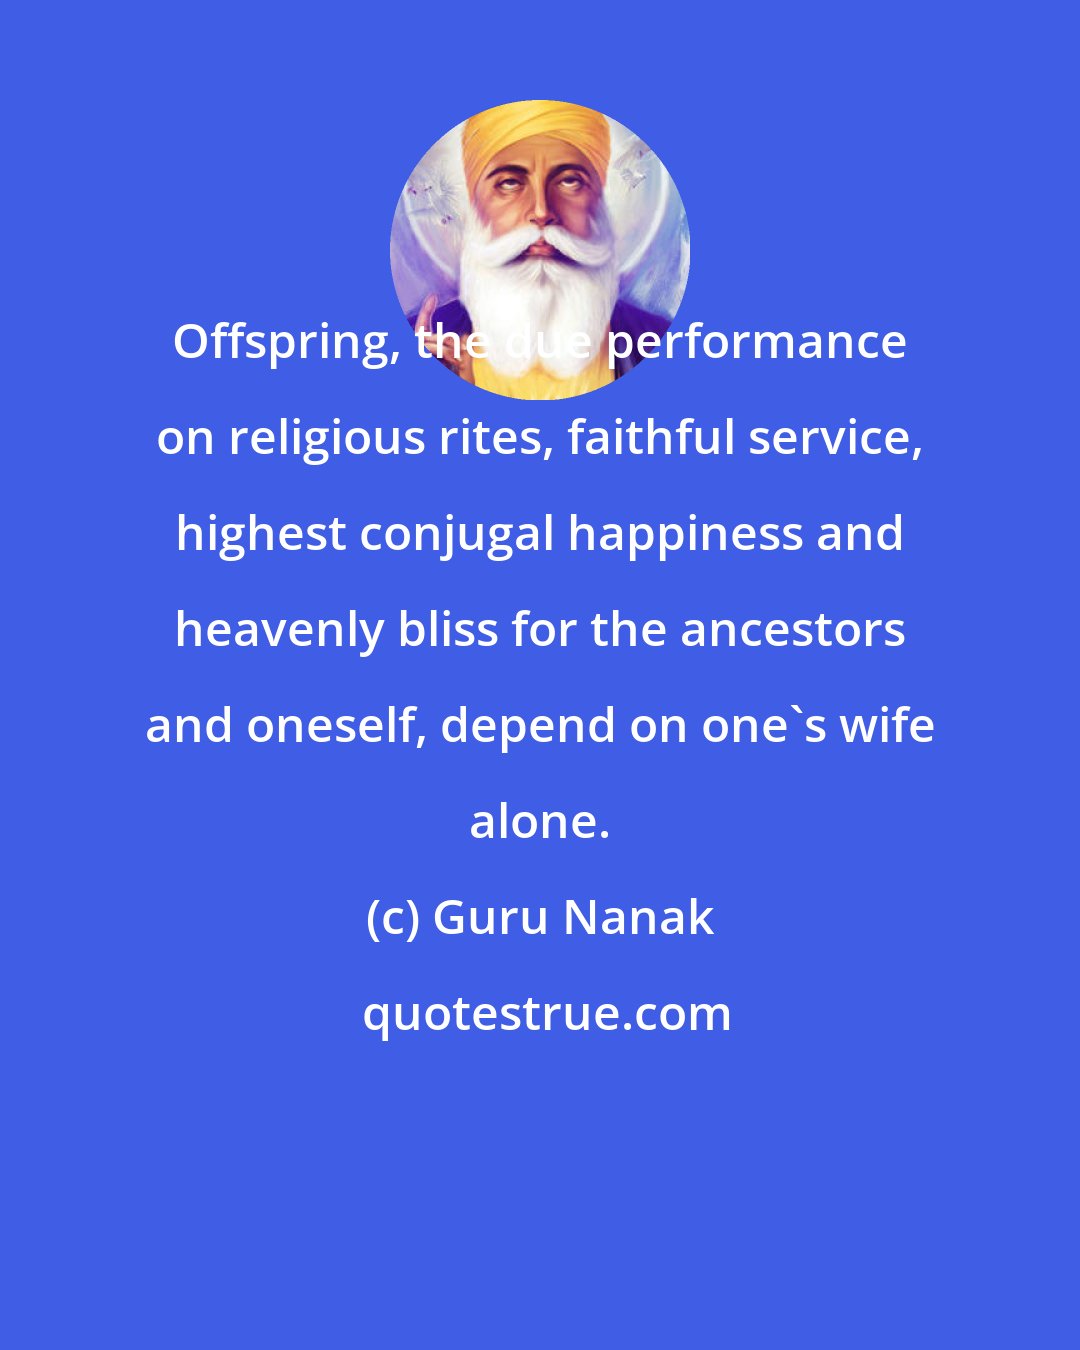 Guru Nanak: Offspring, the due performance on religious rites, faithful service, highest conjugal happiness and heavenly bliss for the ancestors and oneself, depend on one's wife alone.